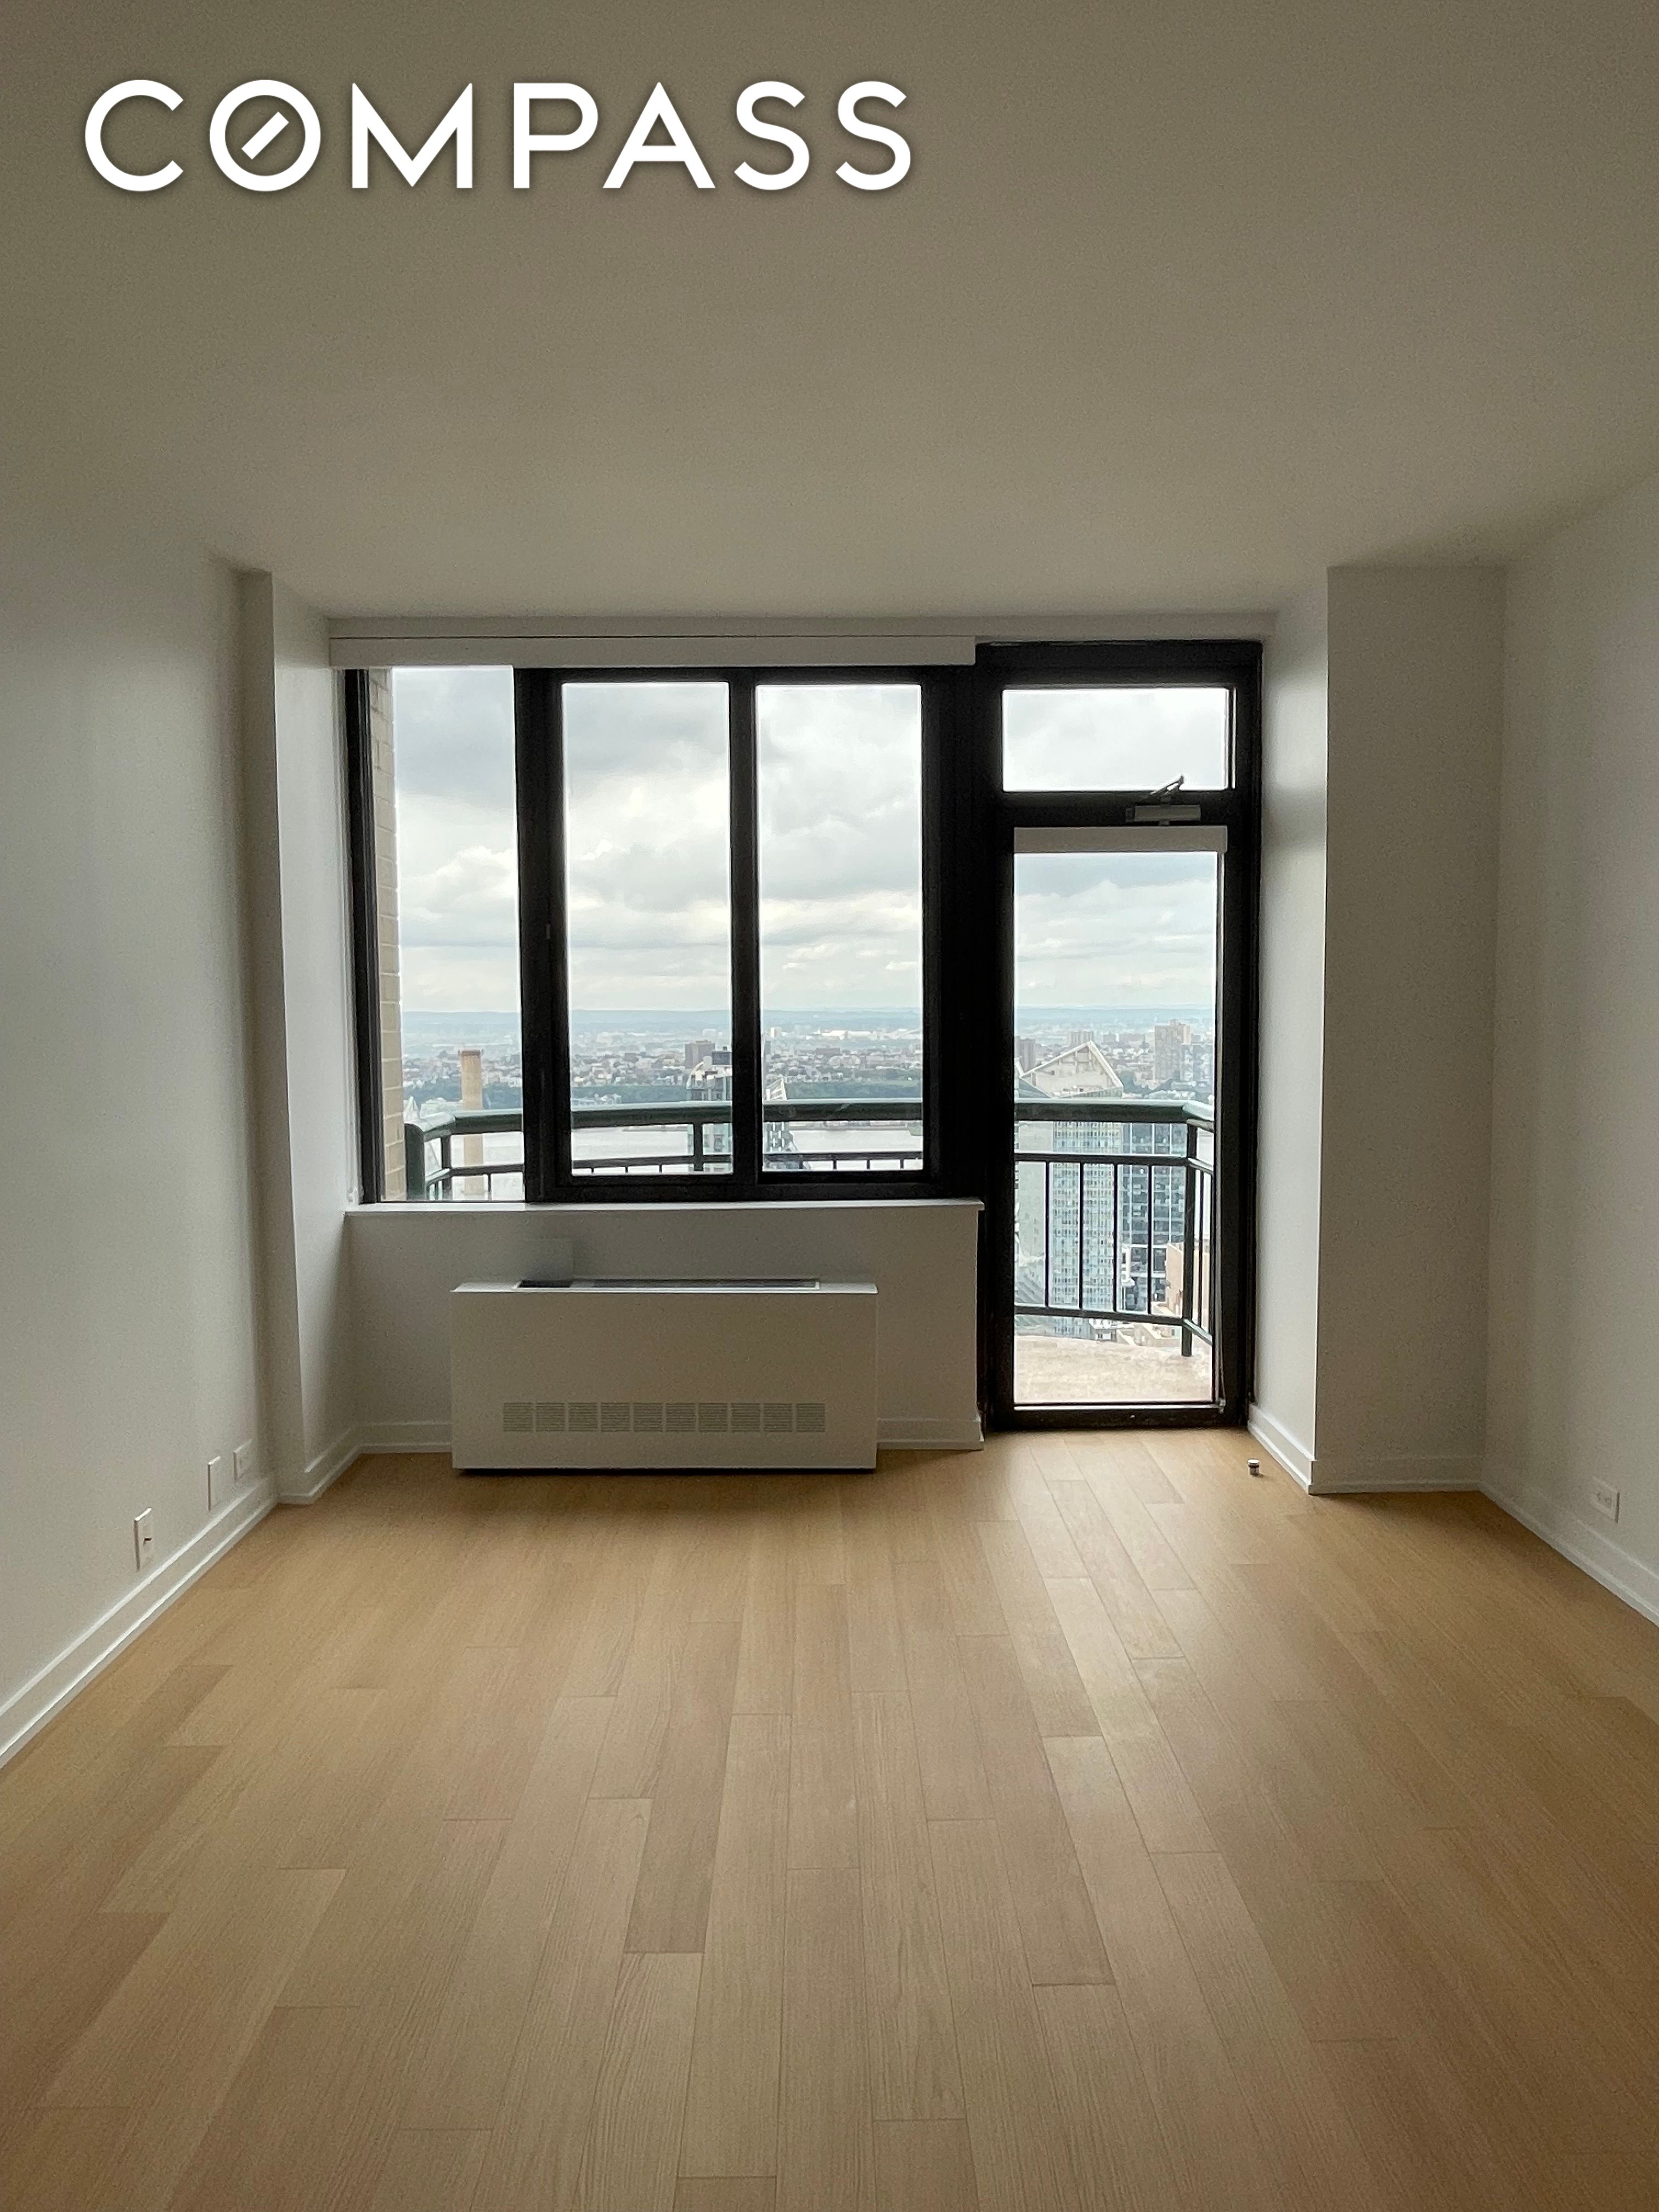 124 West 60th Street 48E, Upper West Side, Upper West Side, NYC - 2 Bedrooms  
2 Bathrooms  
5 Rooms - 